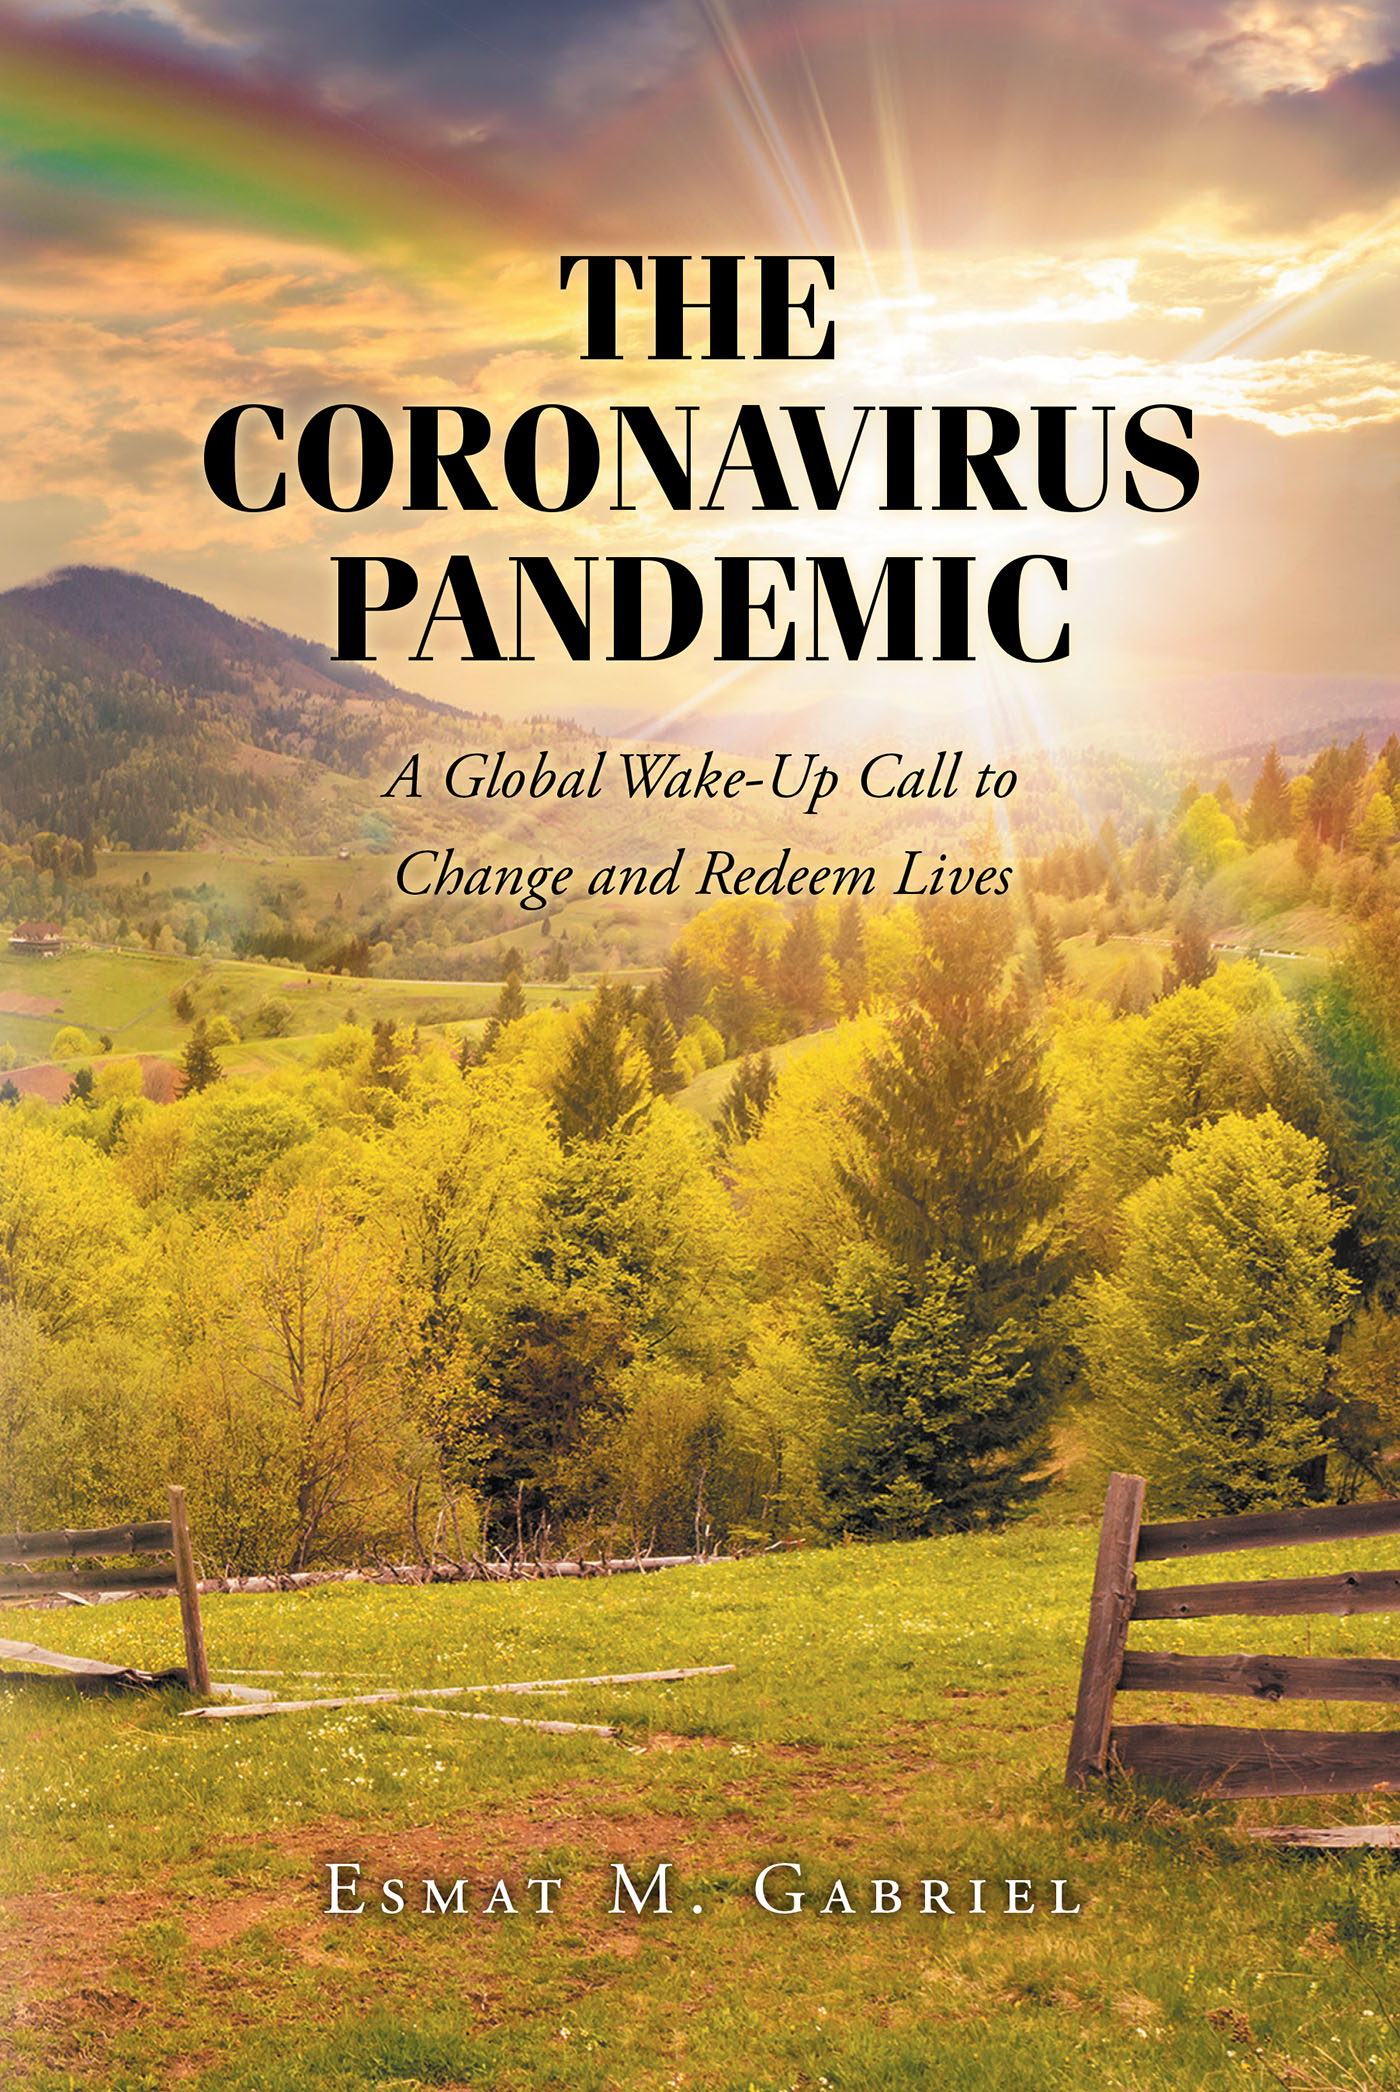 Esmat M. Gabriel’s Newly Released “The Coronavirus Pandemic: A Global Wake-Up Call to Change and Redeem Lives” is a Thought-Provoking Message of Hope